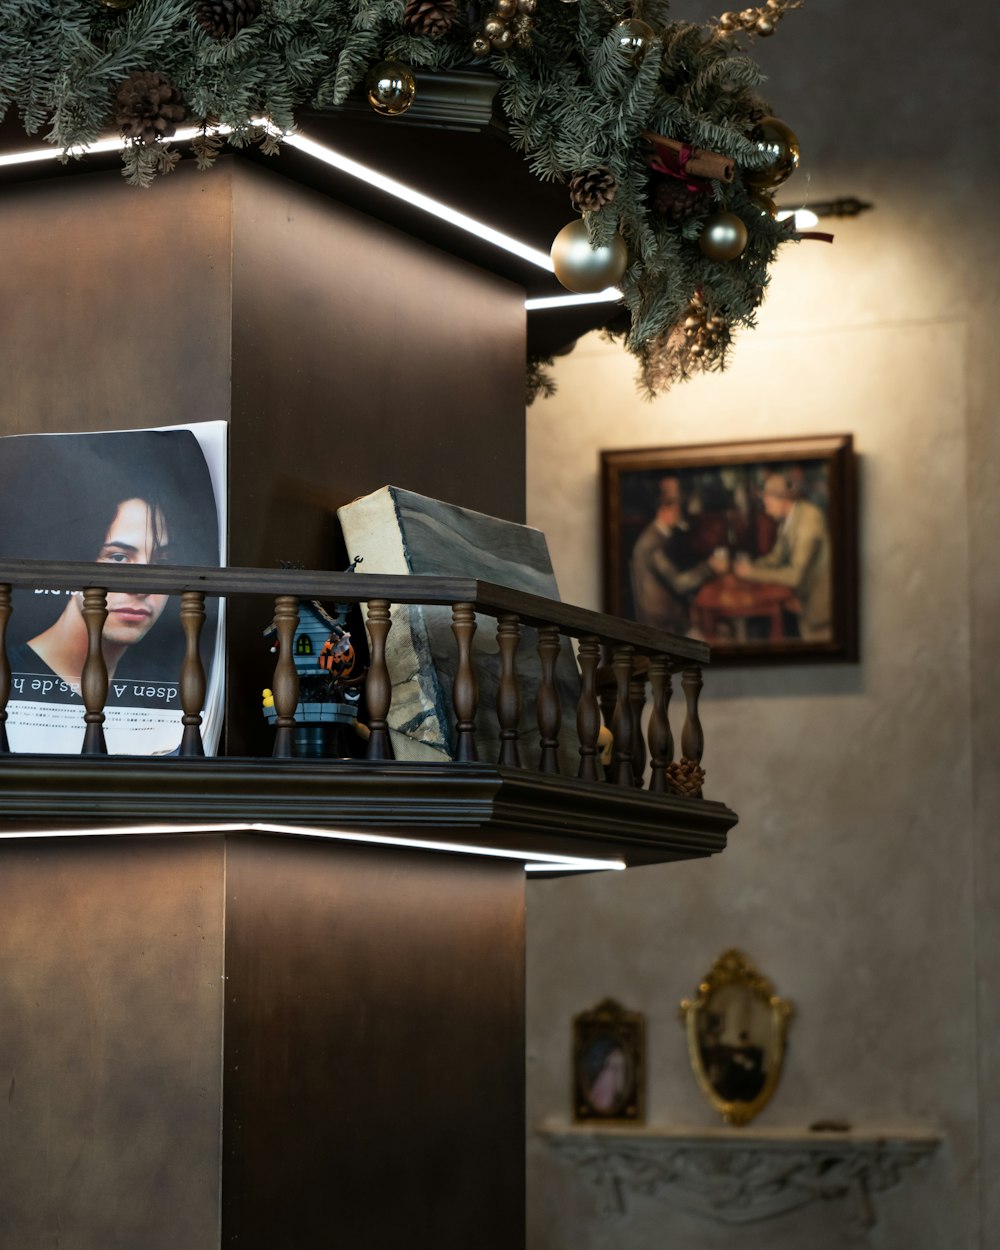 a picture of a woman's face on a shelf above a fireplace